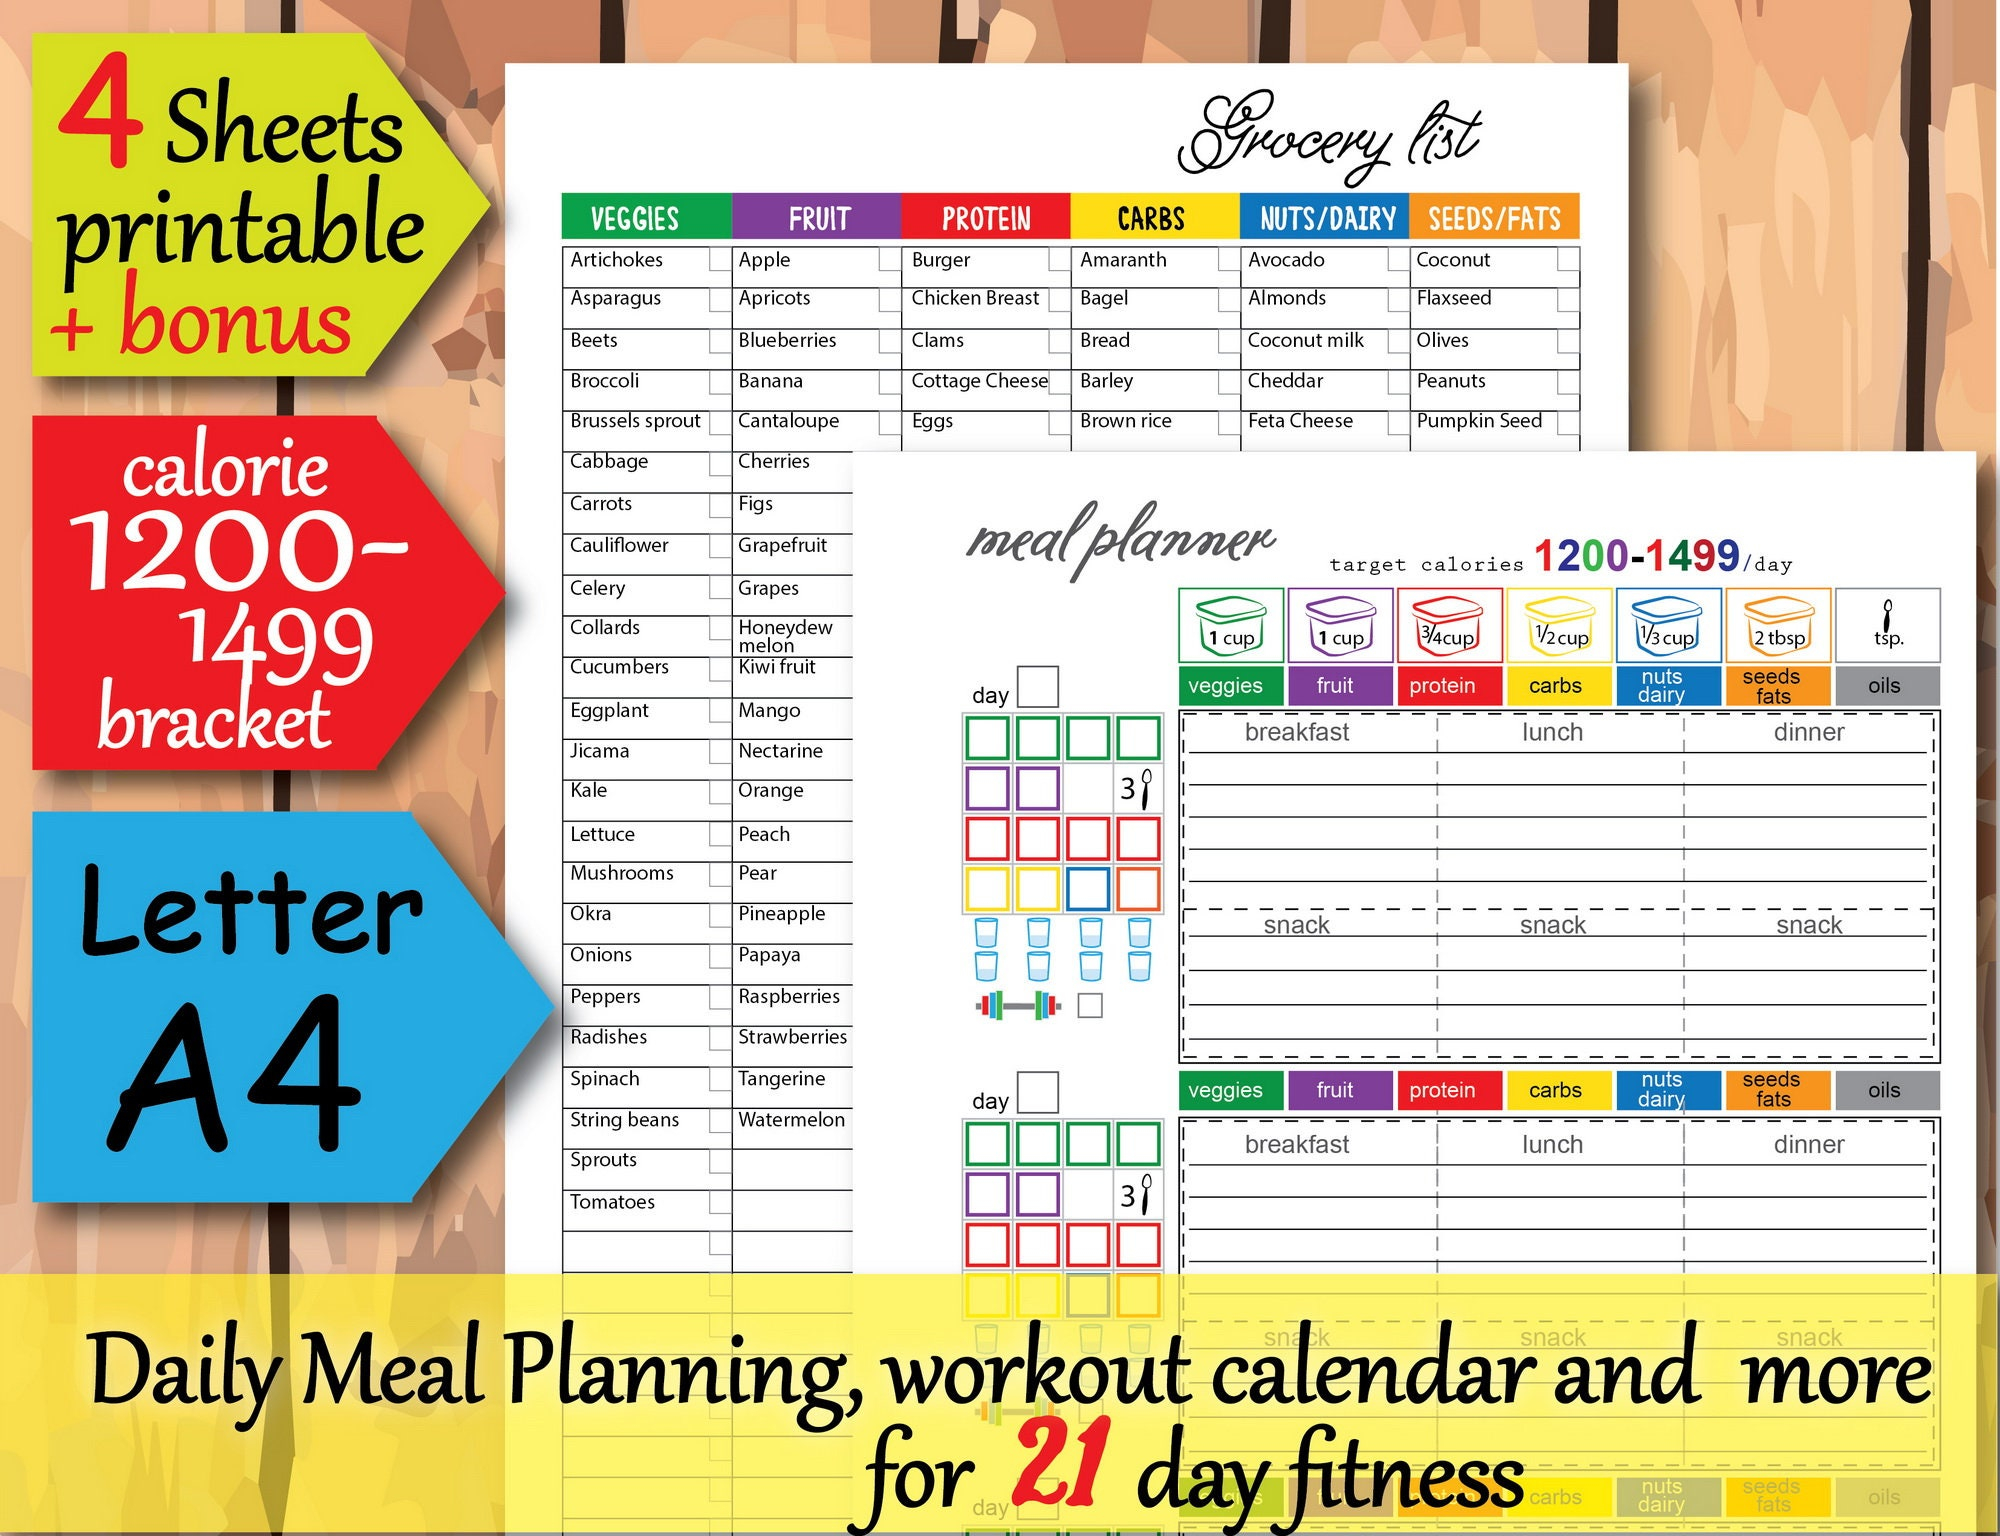 21 Day Fix Meal Planner 1200 Calorie Diet Plan Food 